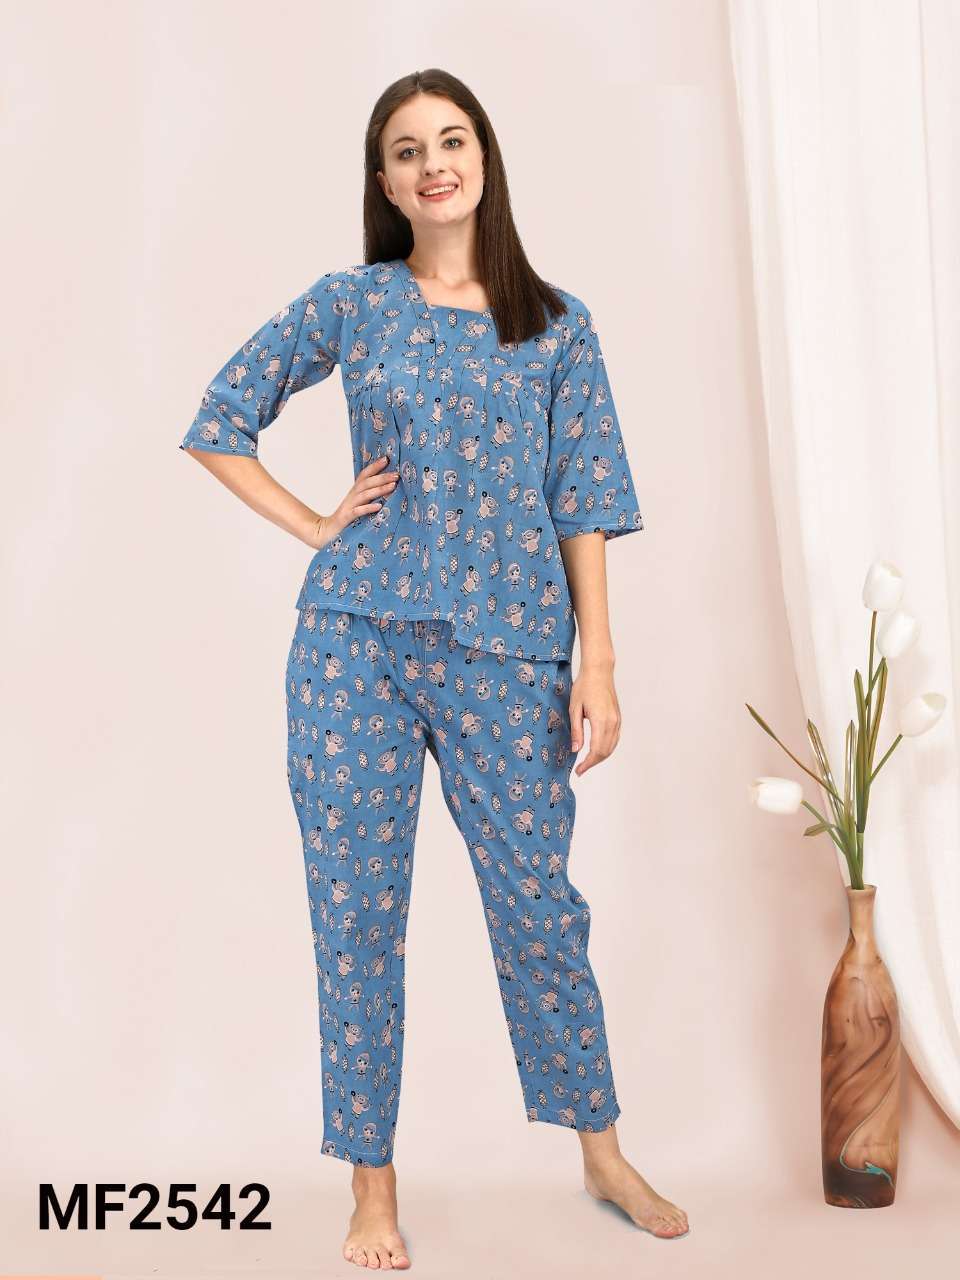 https://www.wholesalecatalog.in/images/product/2022/08/mesmora-night-wear-series-fancy-ladies-night-dress-collection-2022-08-03_00_24_39.jpeg